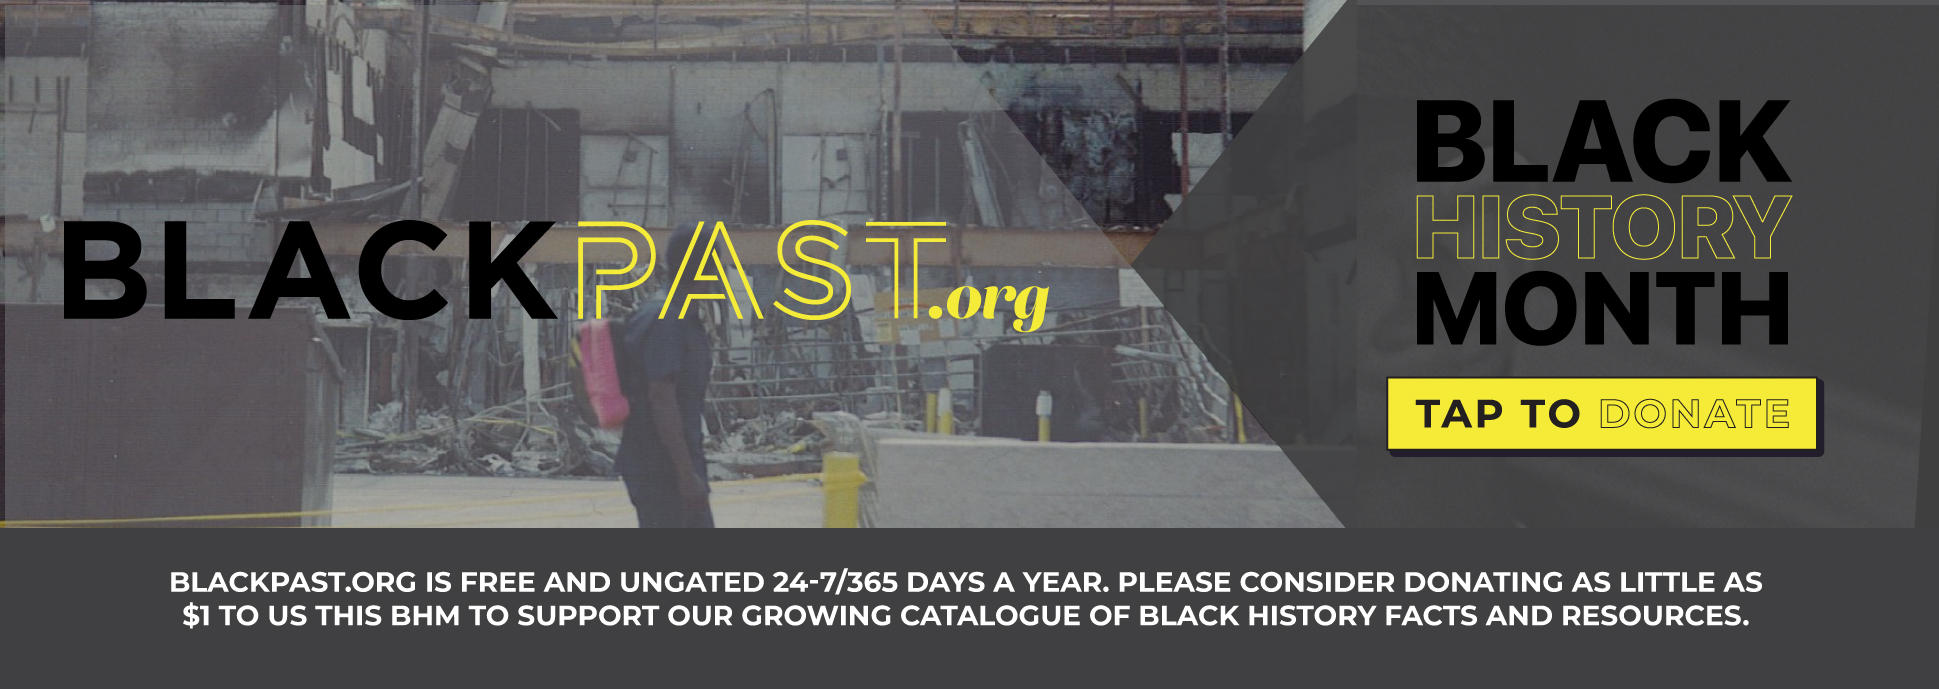 BlackPast.org Black History Month Tap to Donate: BlackPast.org is free and ungated 24-7/365 days a year. Please consider donting as little as $1 to us this BHM to support our growing catalogue of black history fats and resources.